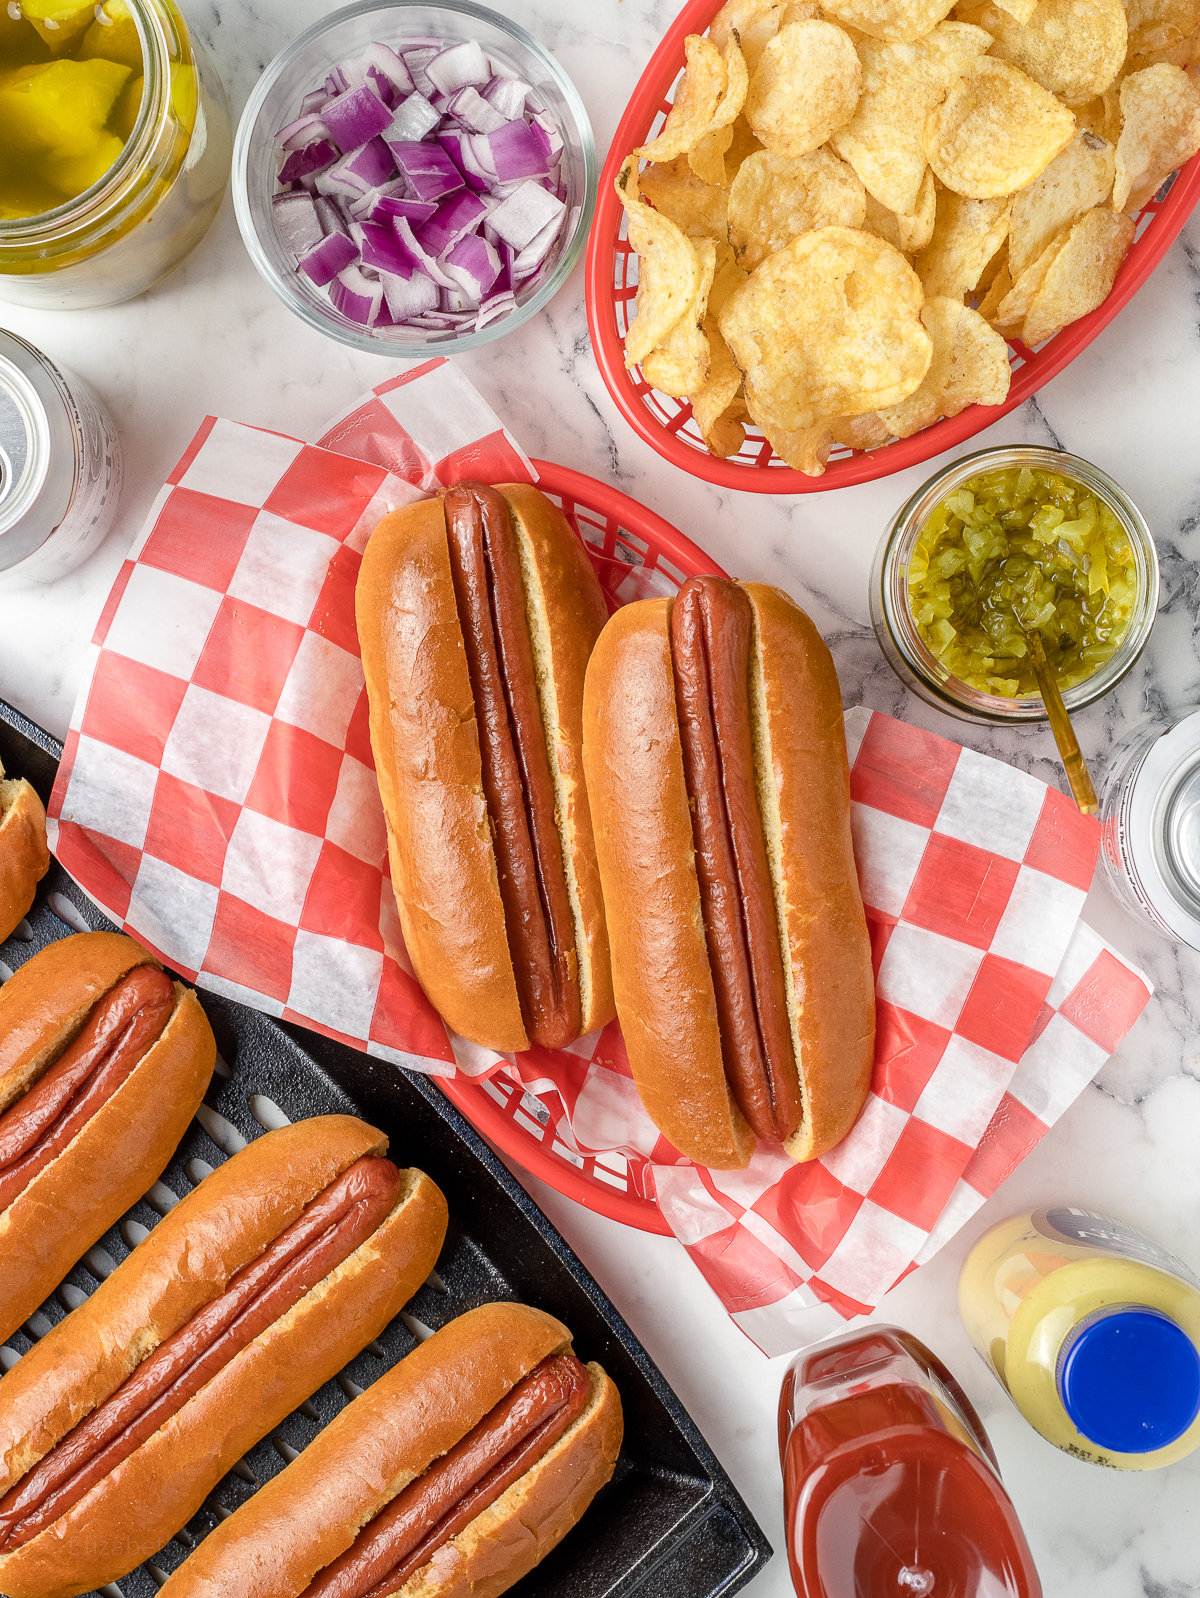 Smoked Hot Dogs in a basket ready to be topped with toppings and more hot dogs on the side.